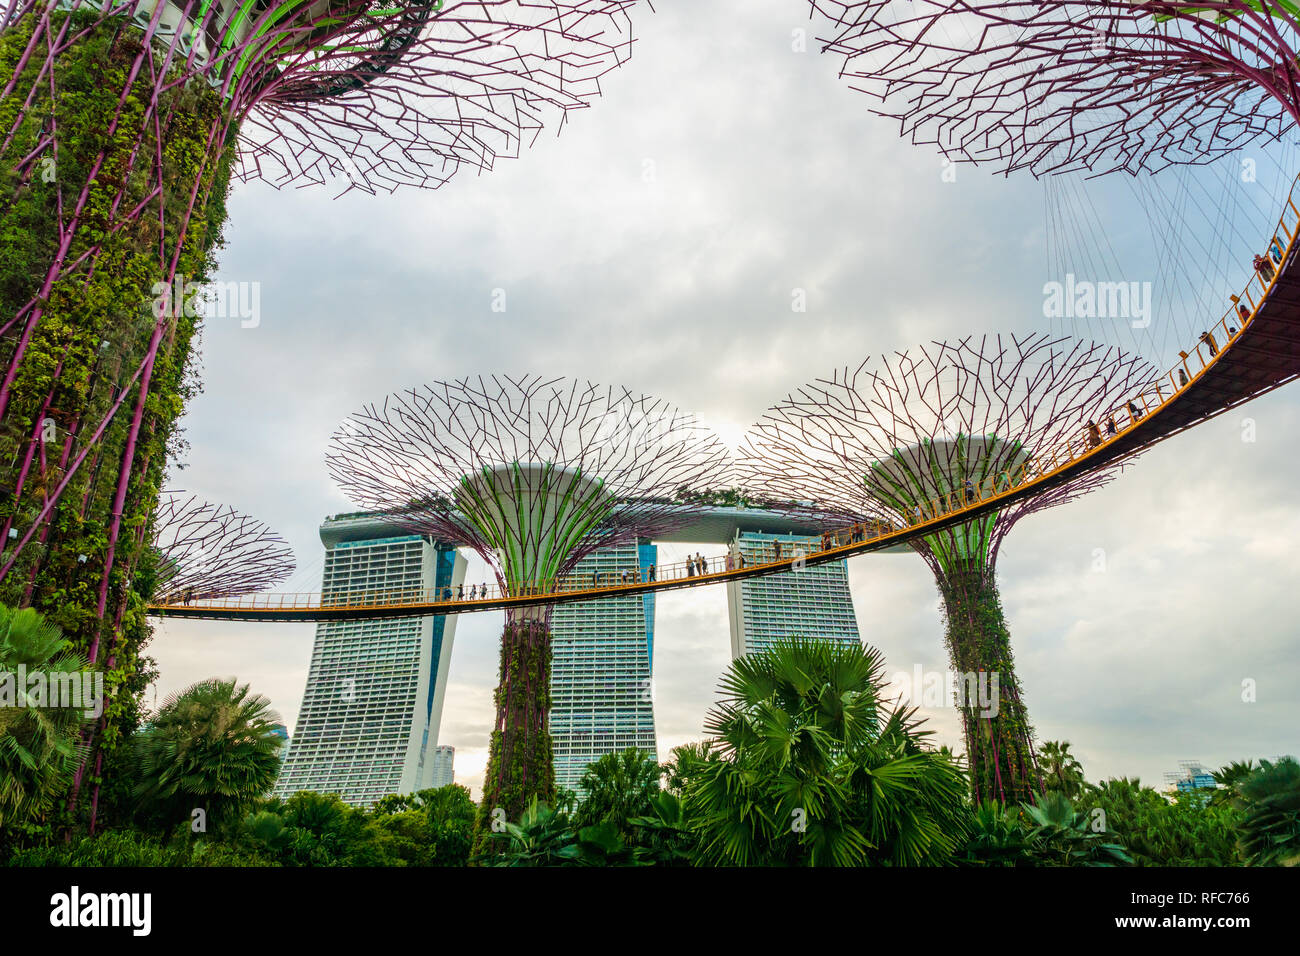 Singapore - January 2019: Gardens by the bay with the Supertree Grove in Singapore near Marina Bay Sands hotel Stock Photo